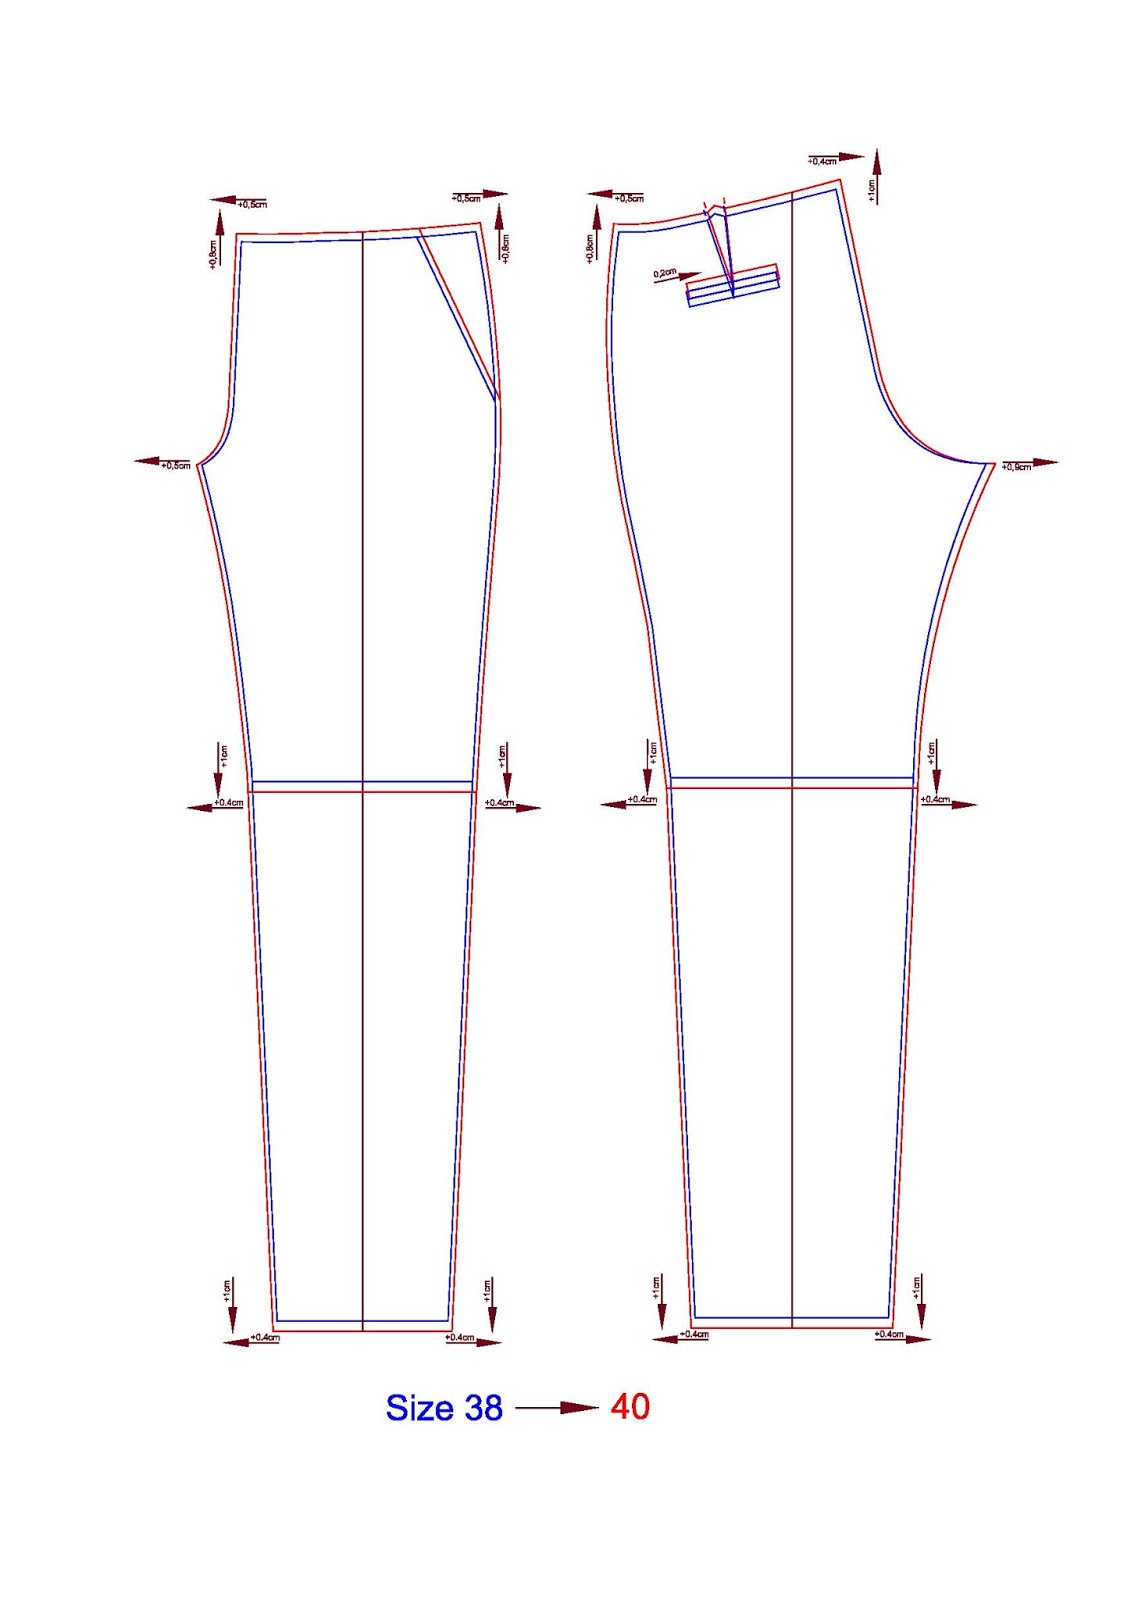 Apparel Pattern Making: How to grade women's pants